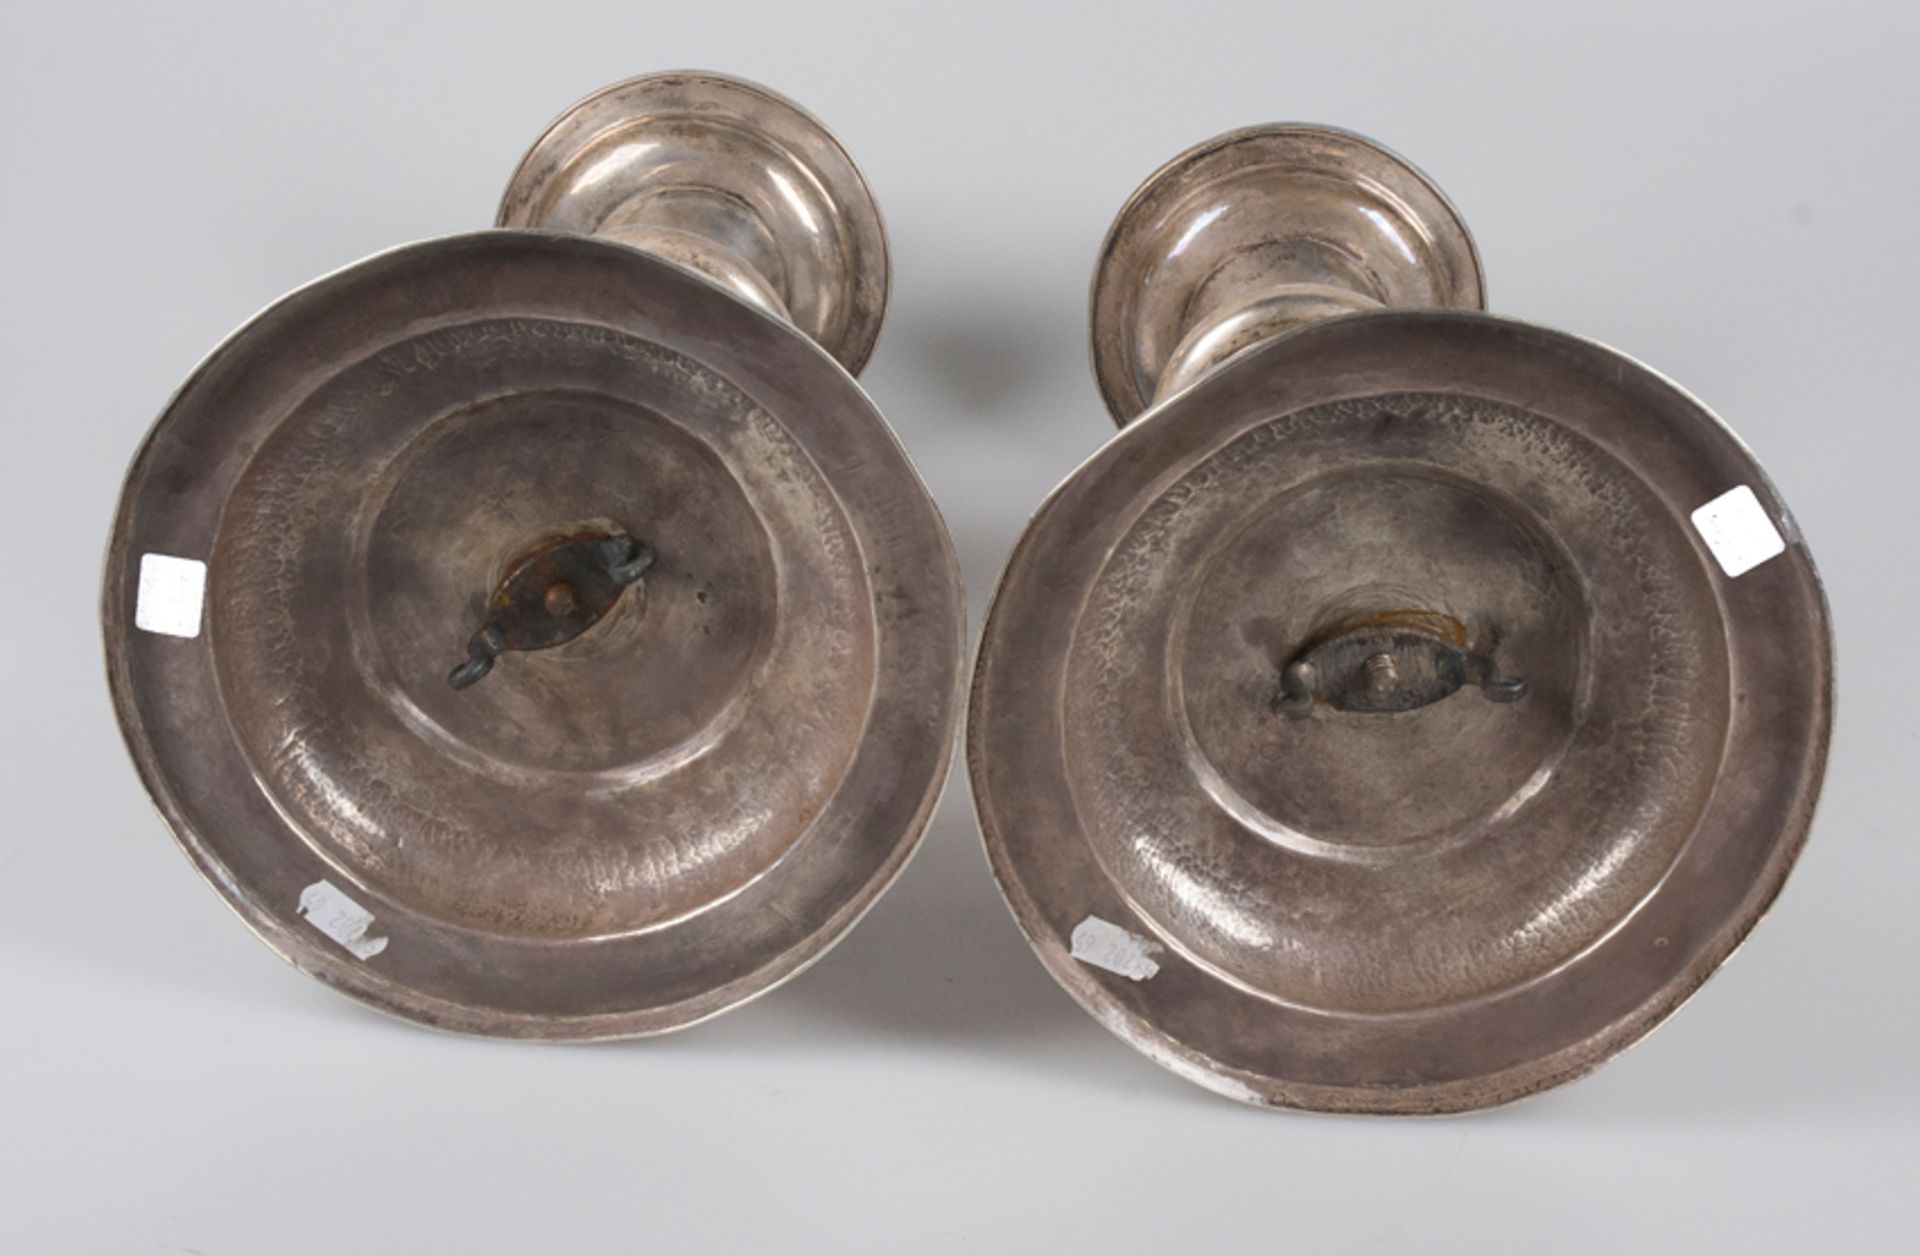 Pair of large silver candlesticks. 17th - 18th century. - Image 5 of 5